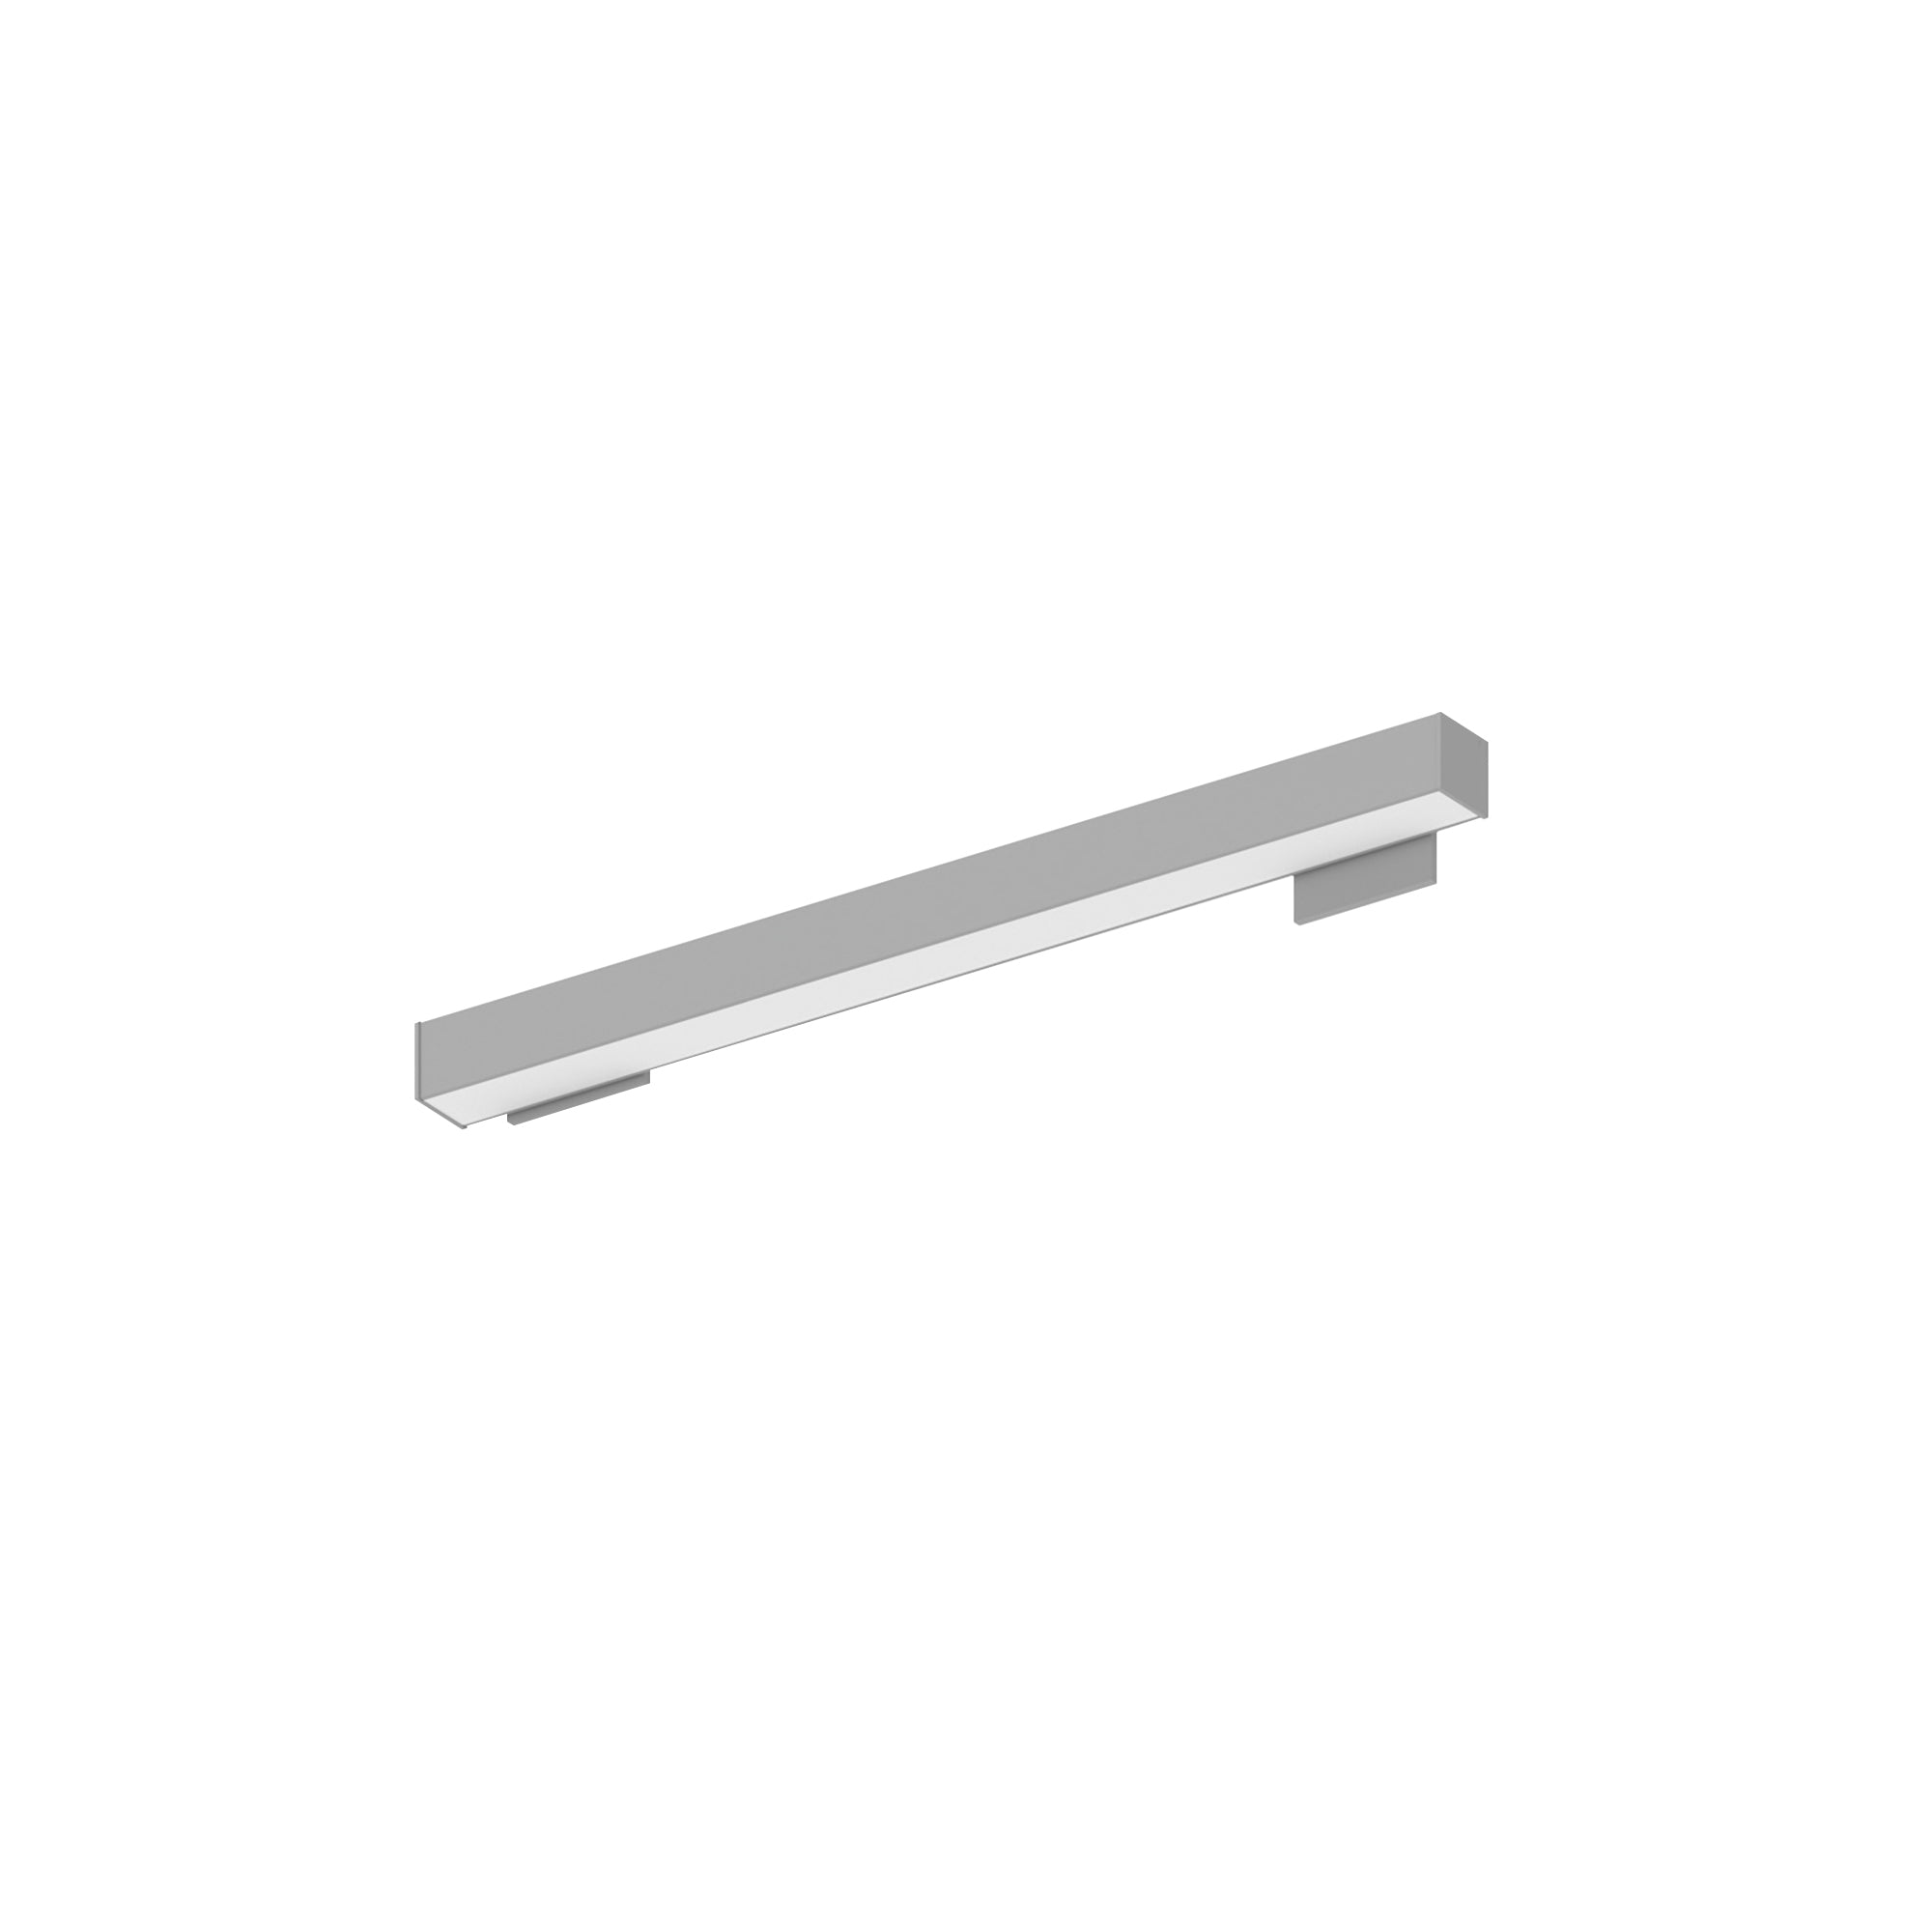 Nora Lighting NWLIN-21040A/L2-R4P - Linear - 2' L-Line LED Wall Mount Linear, 2100lm / 4000K, 2 Inchx4 Inch Left Plate & 4 Inchx4 Inch Right Plate, Right Power Feed, Aluminum Finish